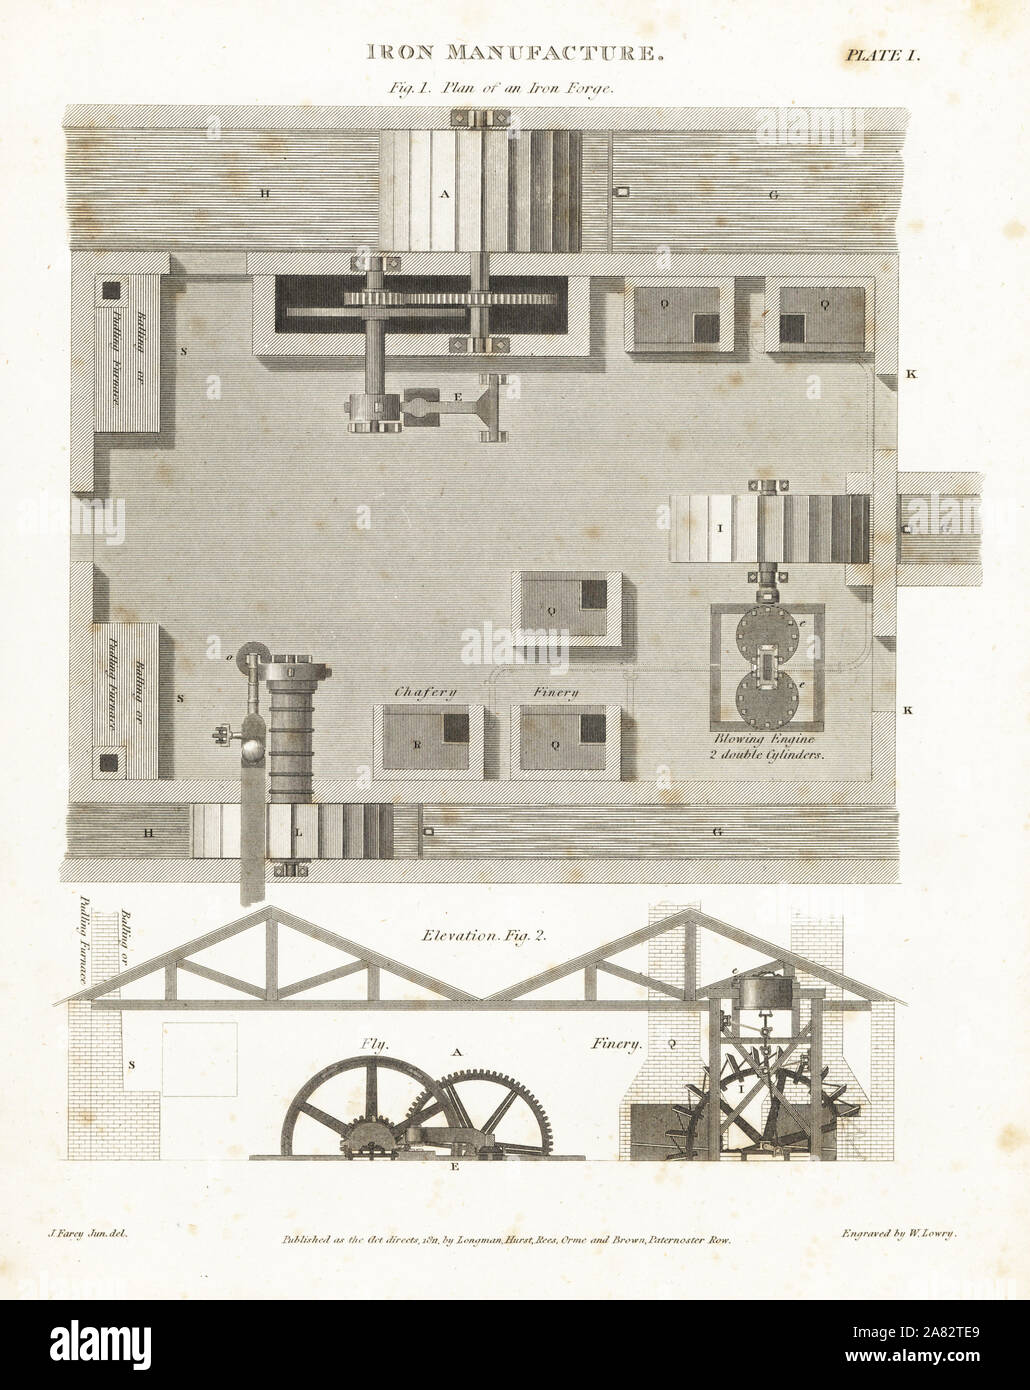 Plan and elevation of an iron forge, with chafery, finery, blowing engine, and balling or pudding furnace. Copperplate engraving by Wilson Lowry after a drawing by John Farey Jr.  from Abraham Rees' Cyclopedia or Universal Dictionary of Arts, Sciences and Literature, Longman, Hurst, Rees, Orme and Brown, London, 1811. Stock Photo